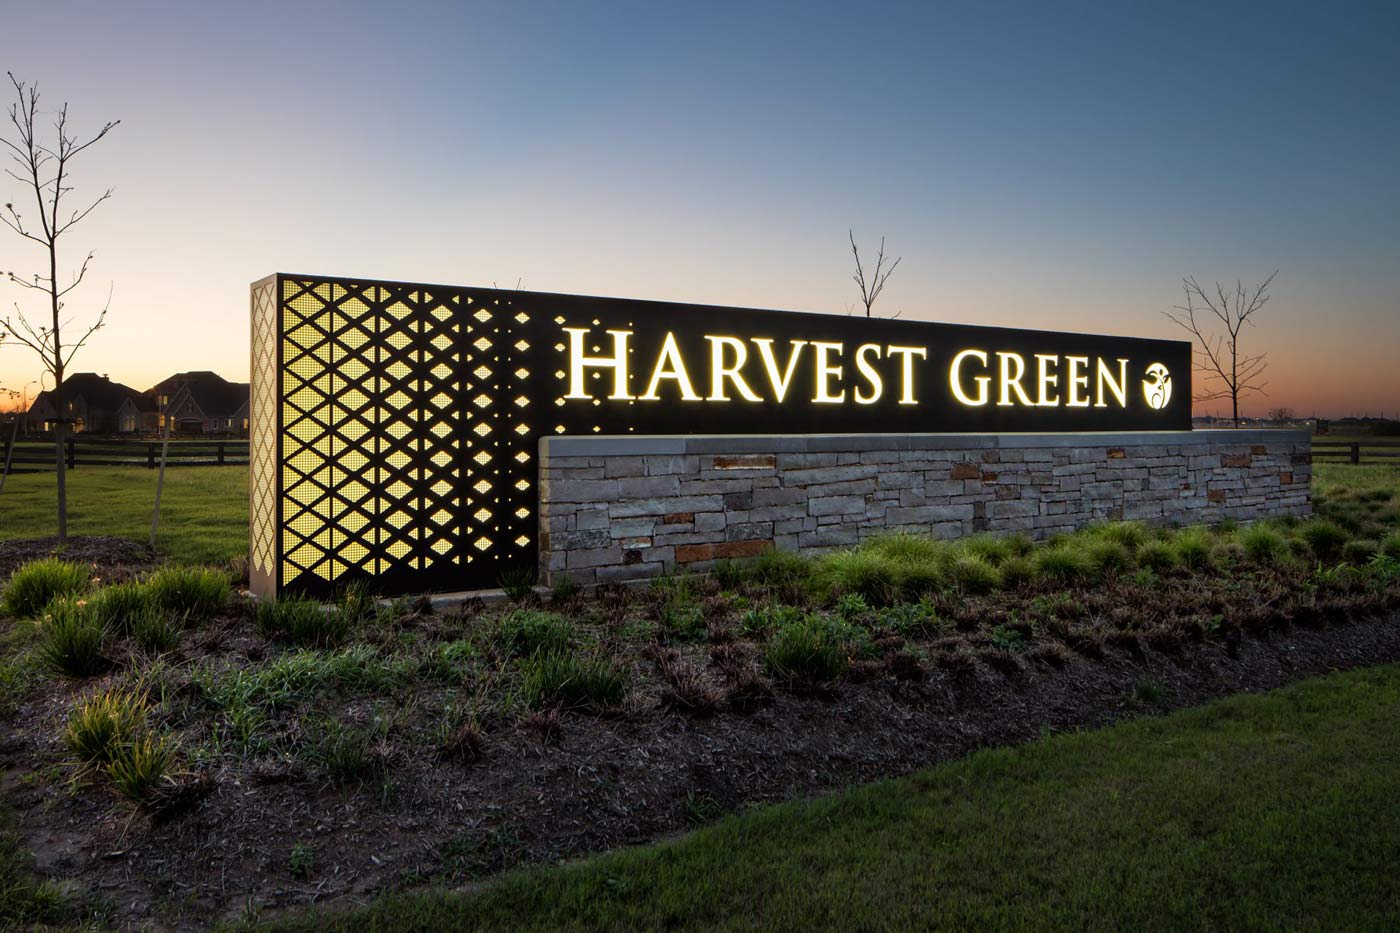 havest_green_003